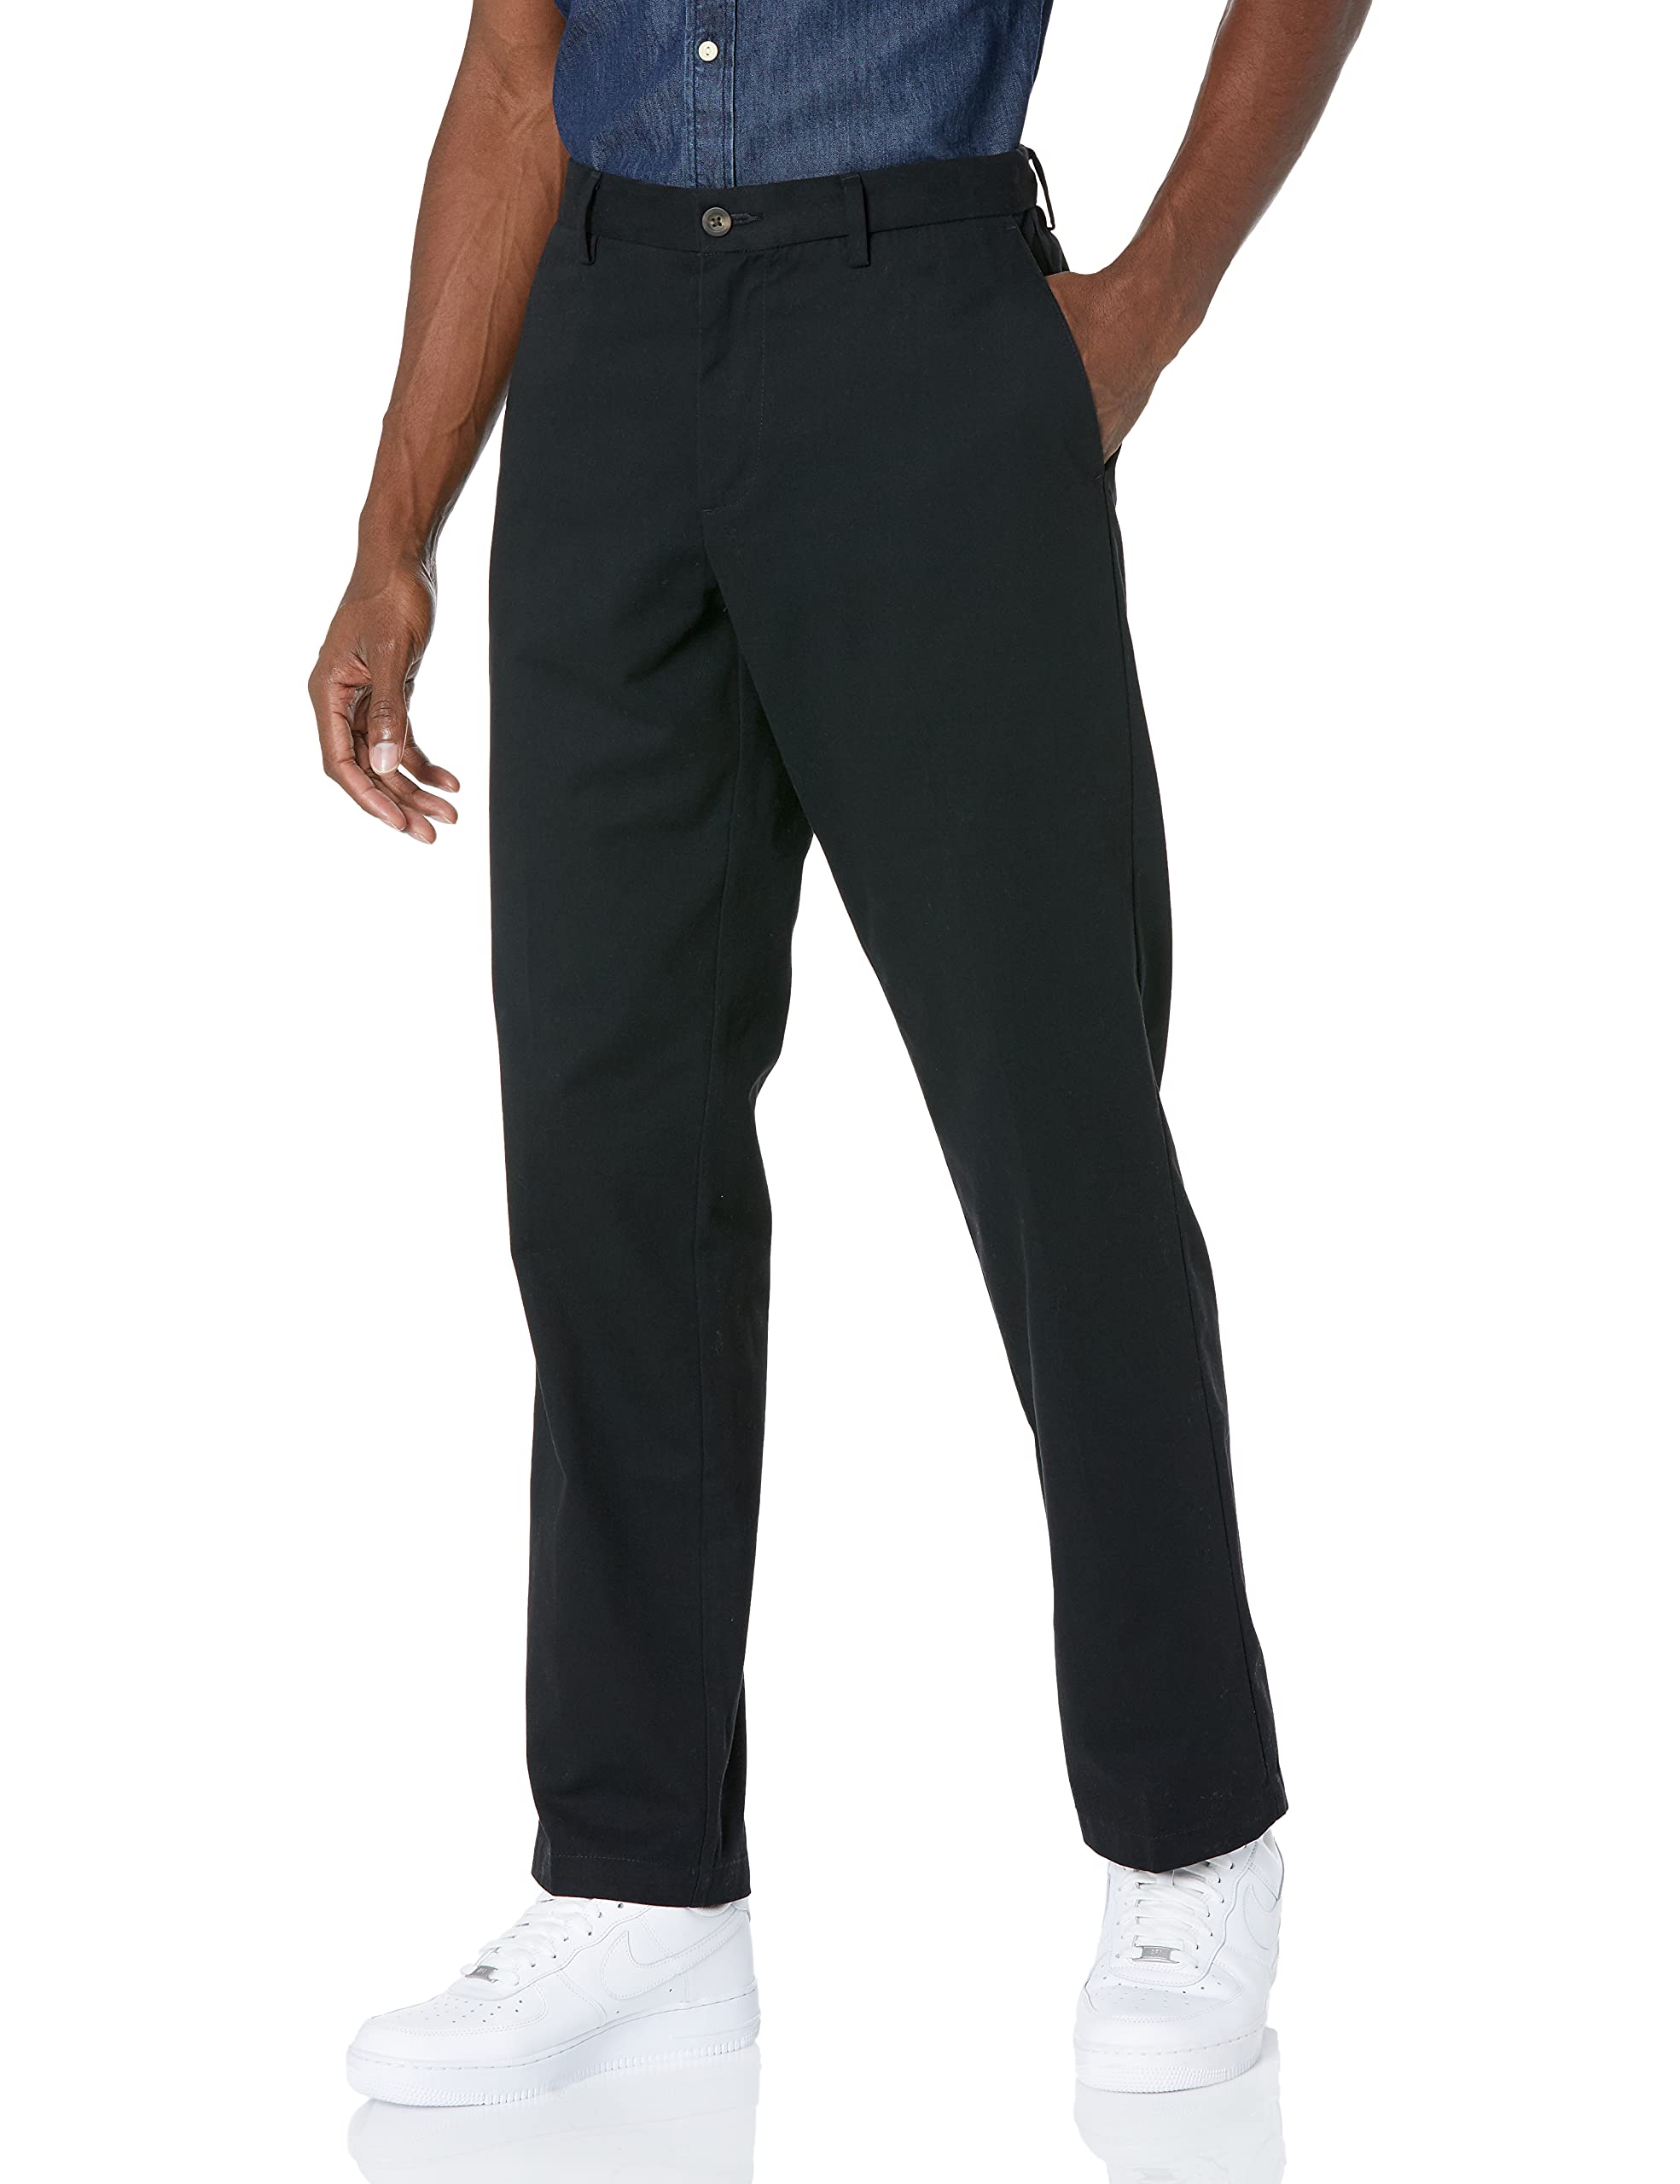 Amazon Essentials Men's Classic-Fit Wrinkle-Resistant Flat-Front Chino Pant (Available in Big & Tall), Black, 40W x 29L